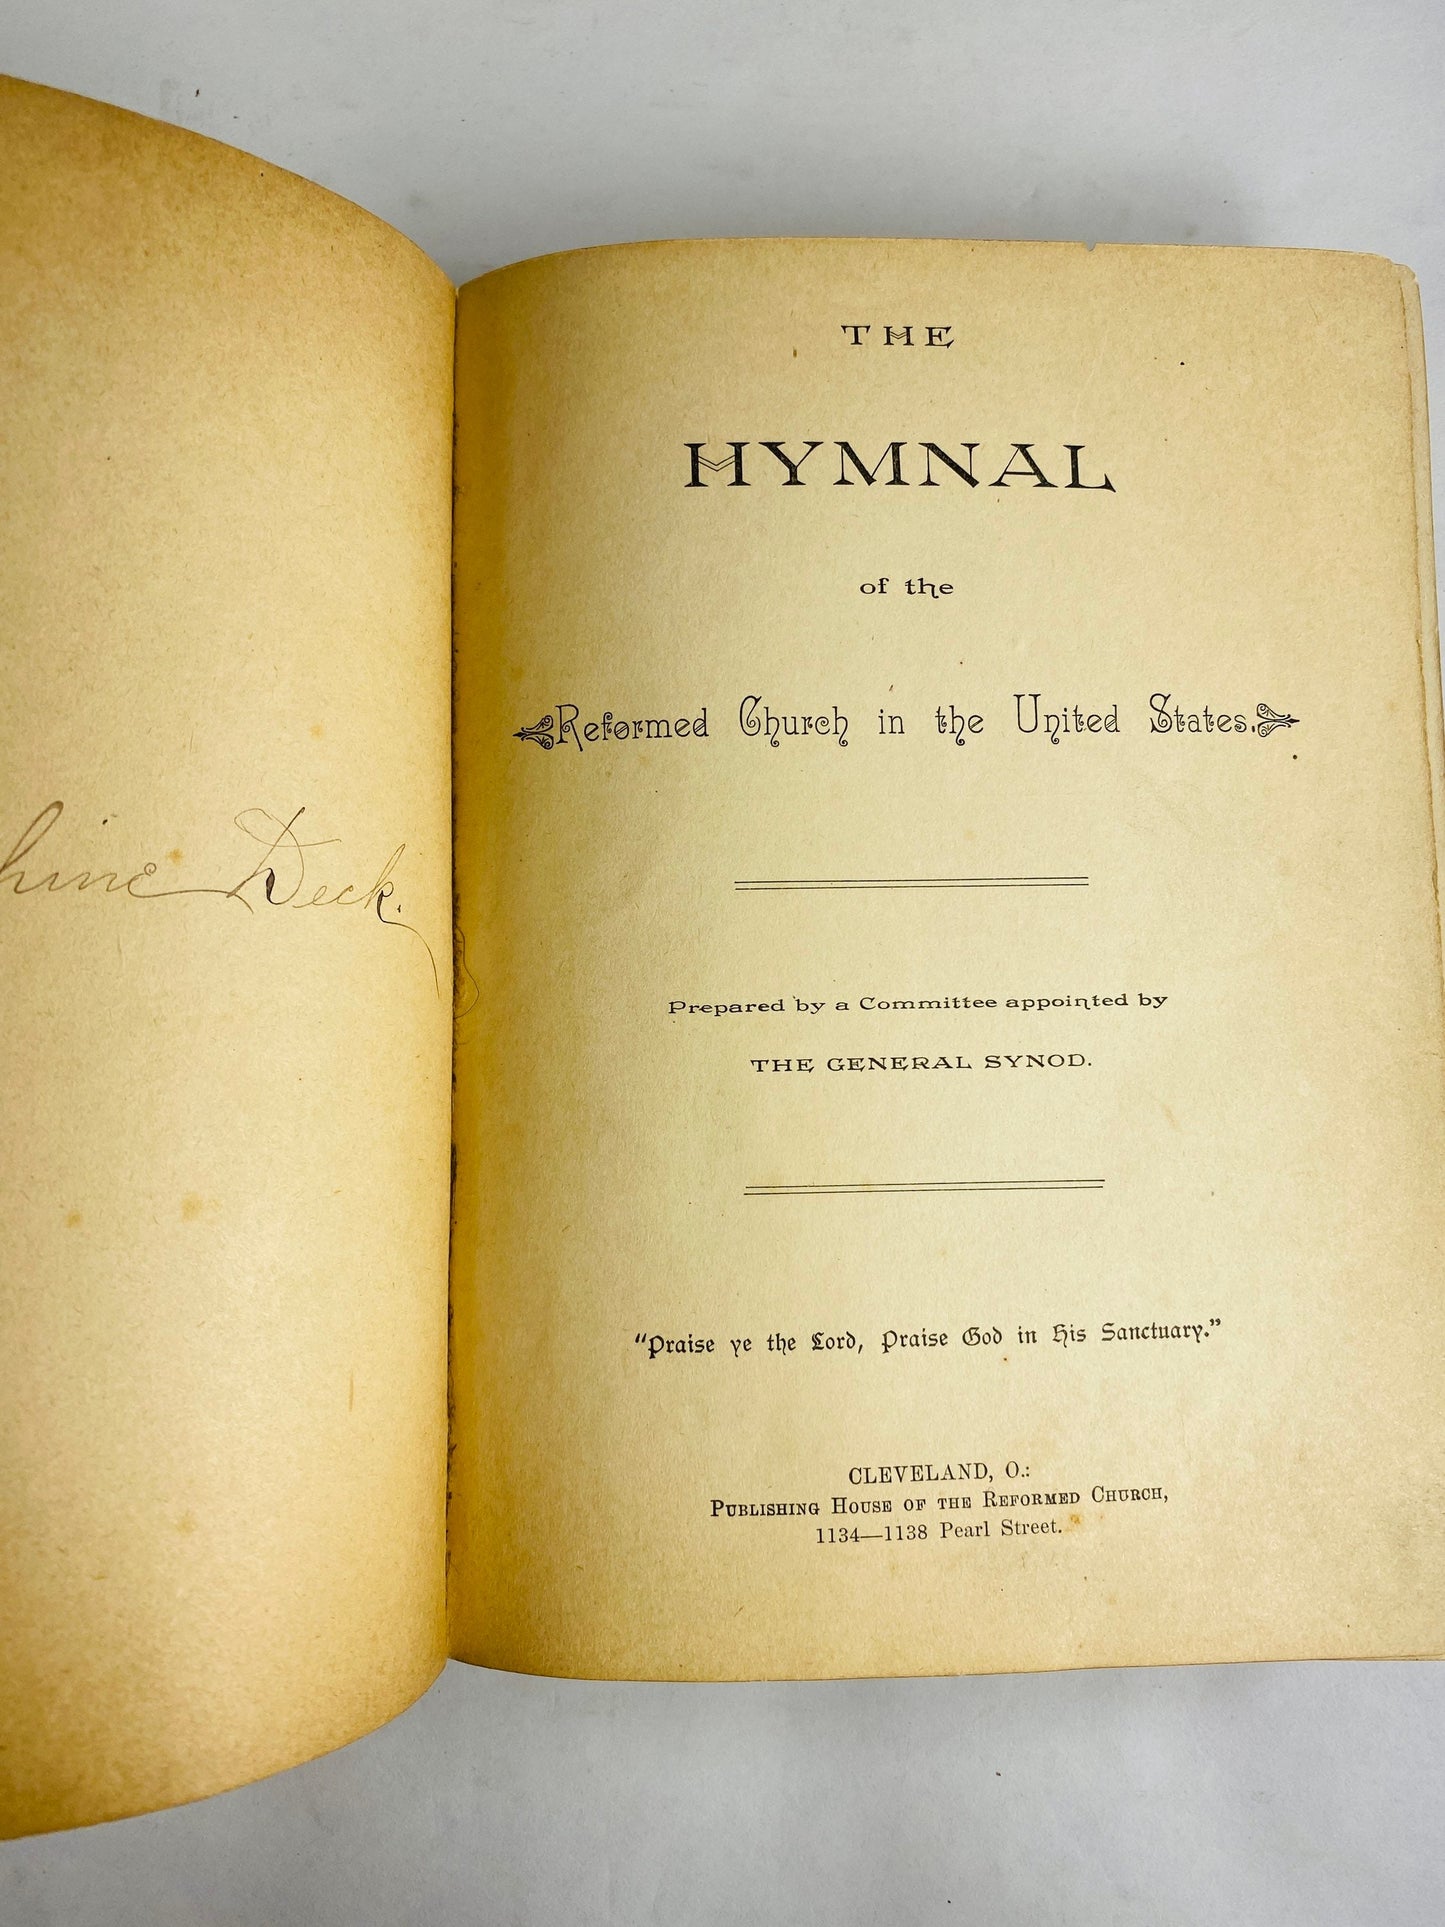 1890 Post Civil War Christianity vintage hymnal book Antique Reformed church Cleveland Ohio